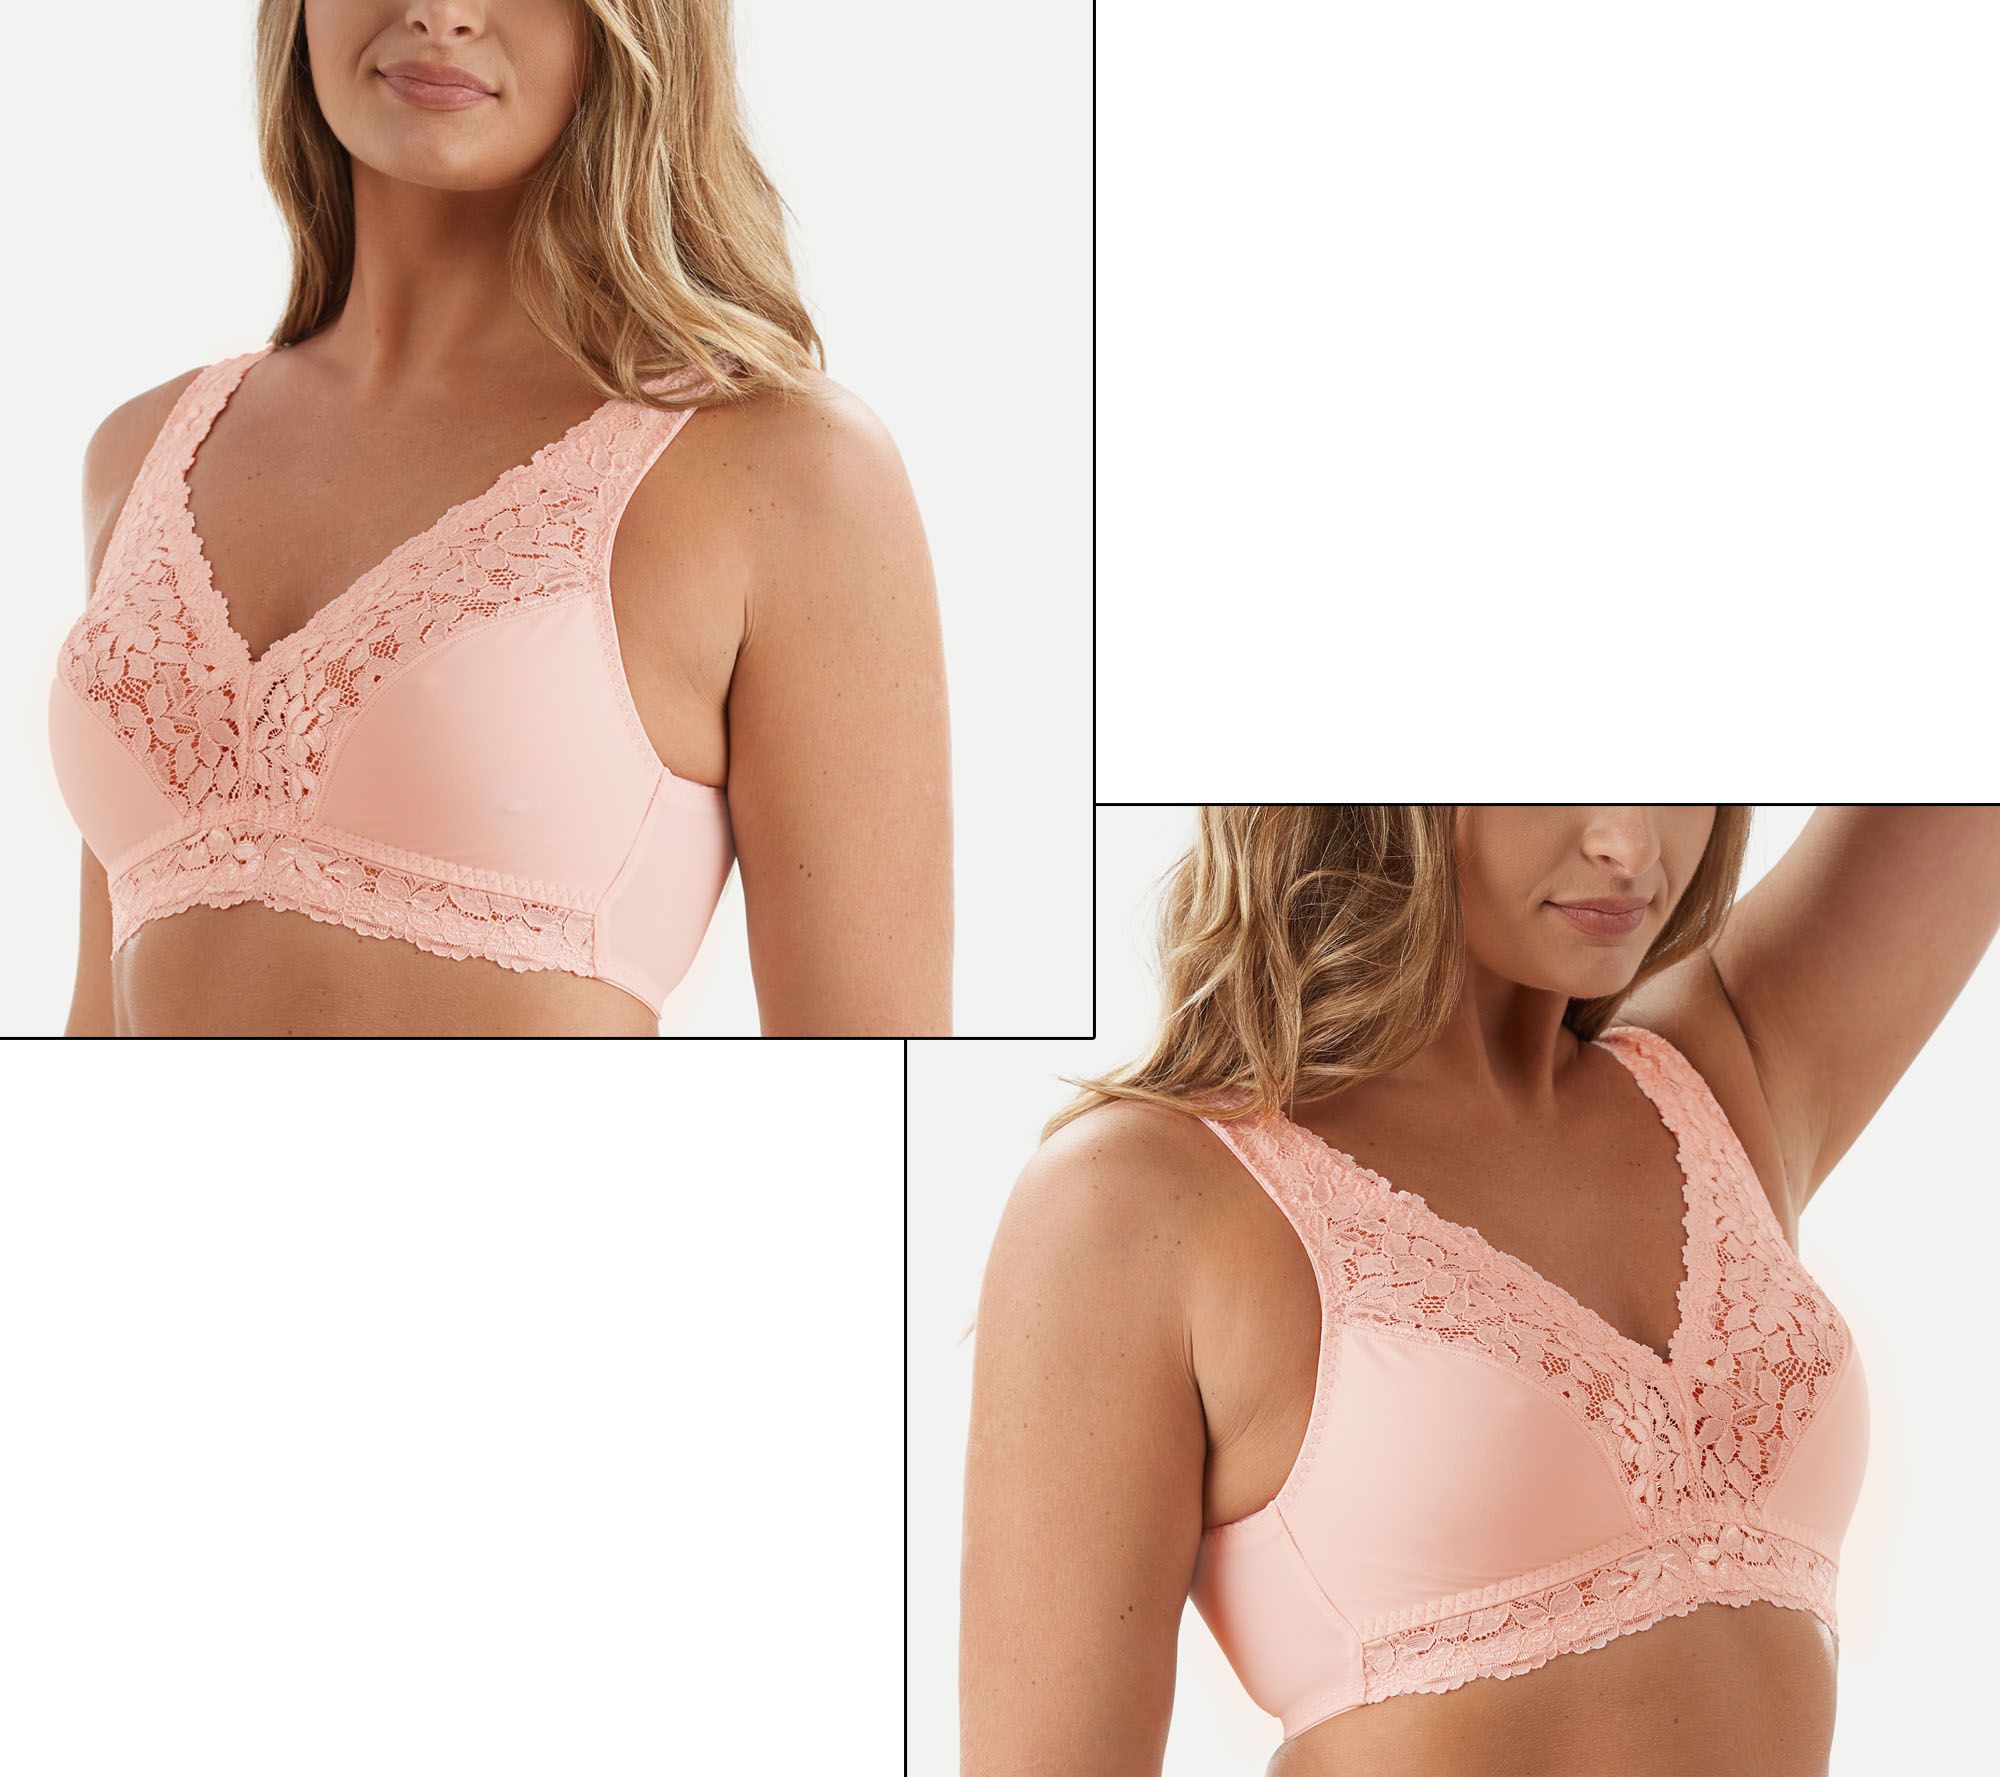 Breezies Size XL Lace Soft Support Wire-Free Bra